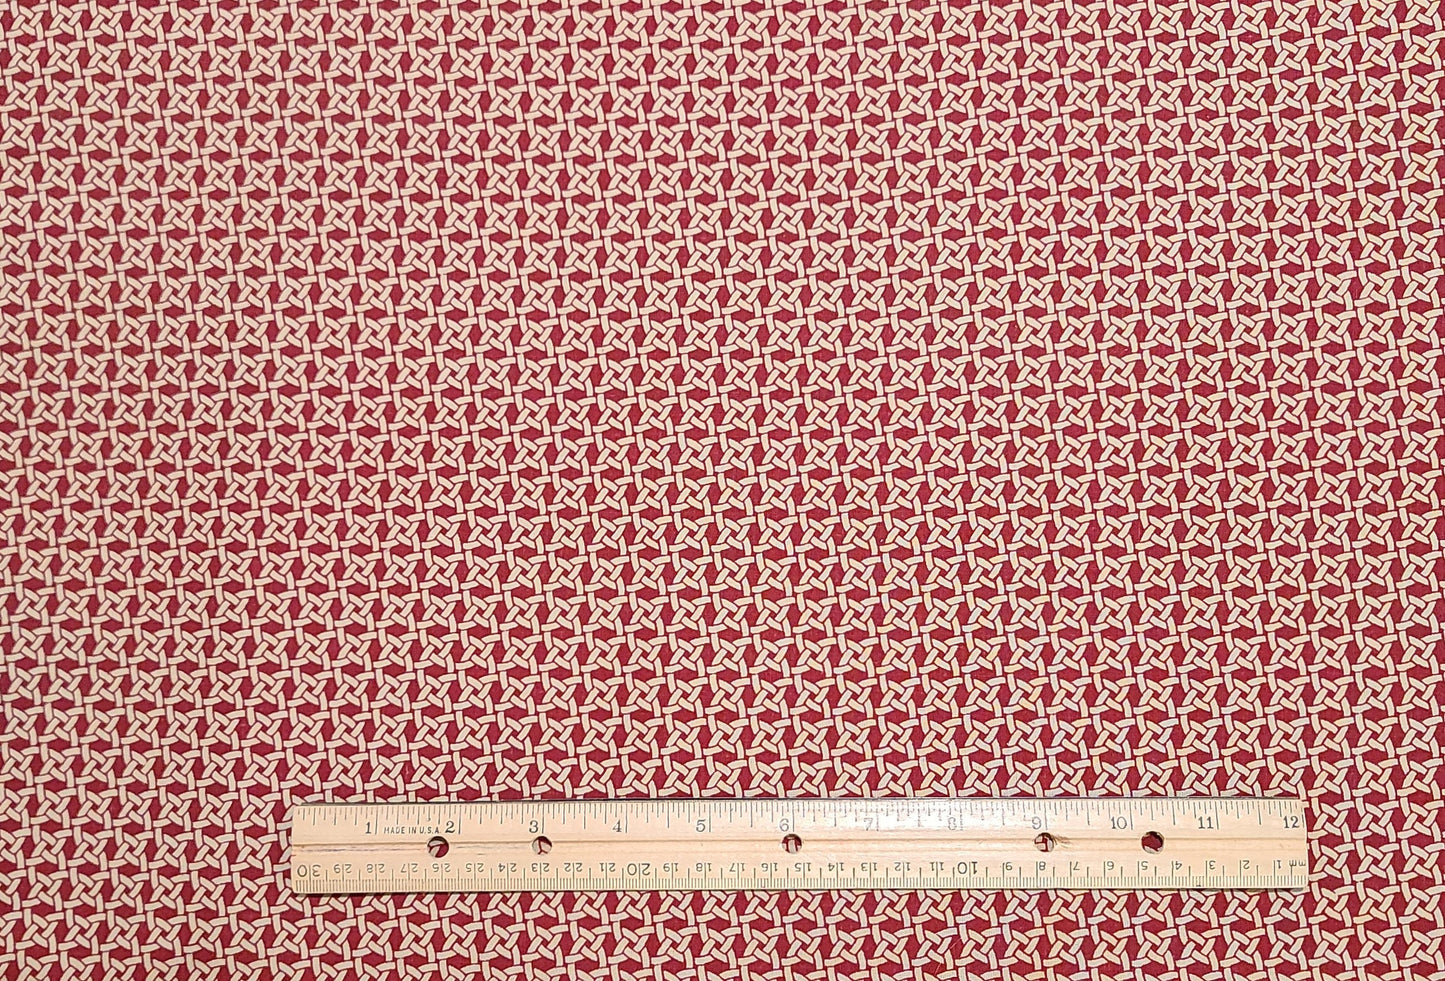 Dark Red and Tan "Chain Link" Pattern Fabric - Selvage to Selvage Print